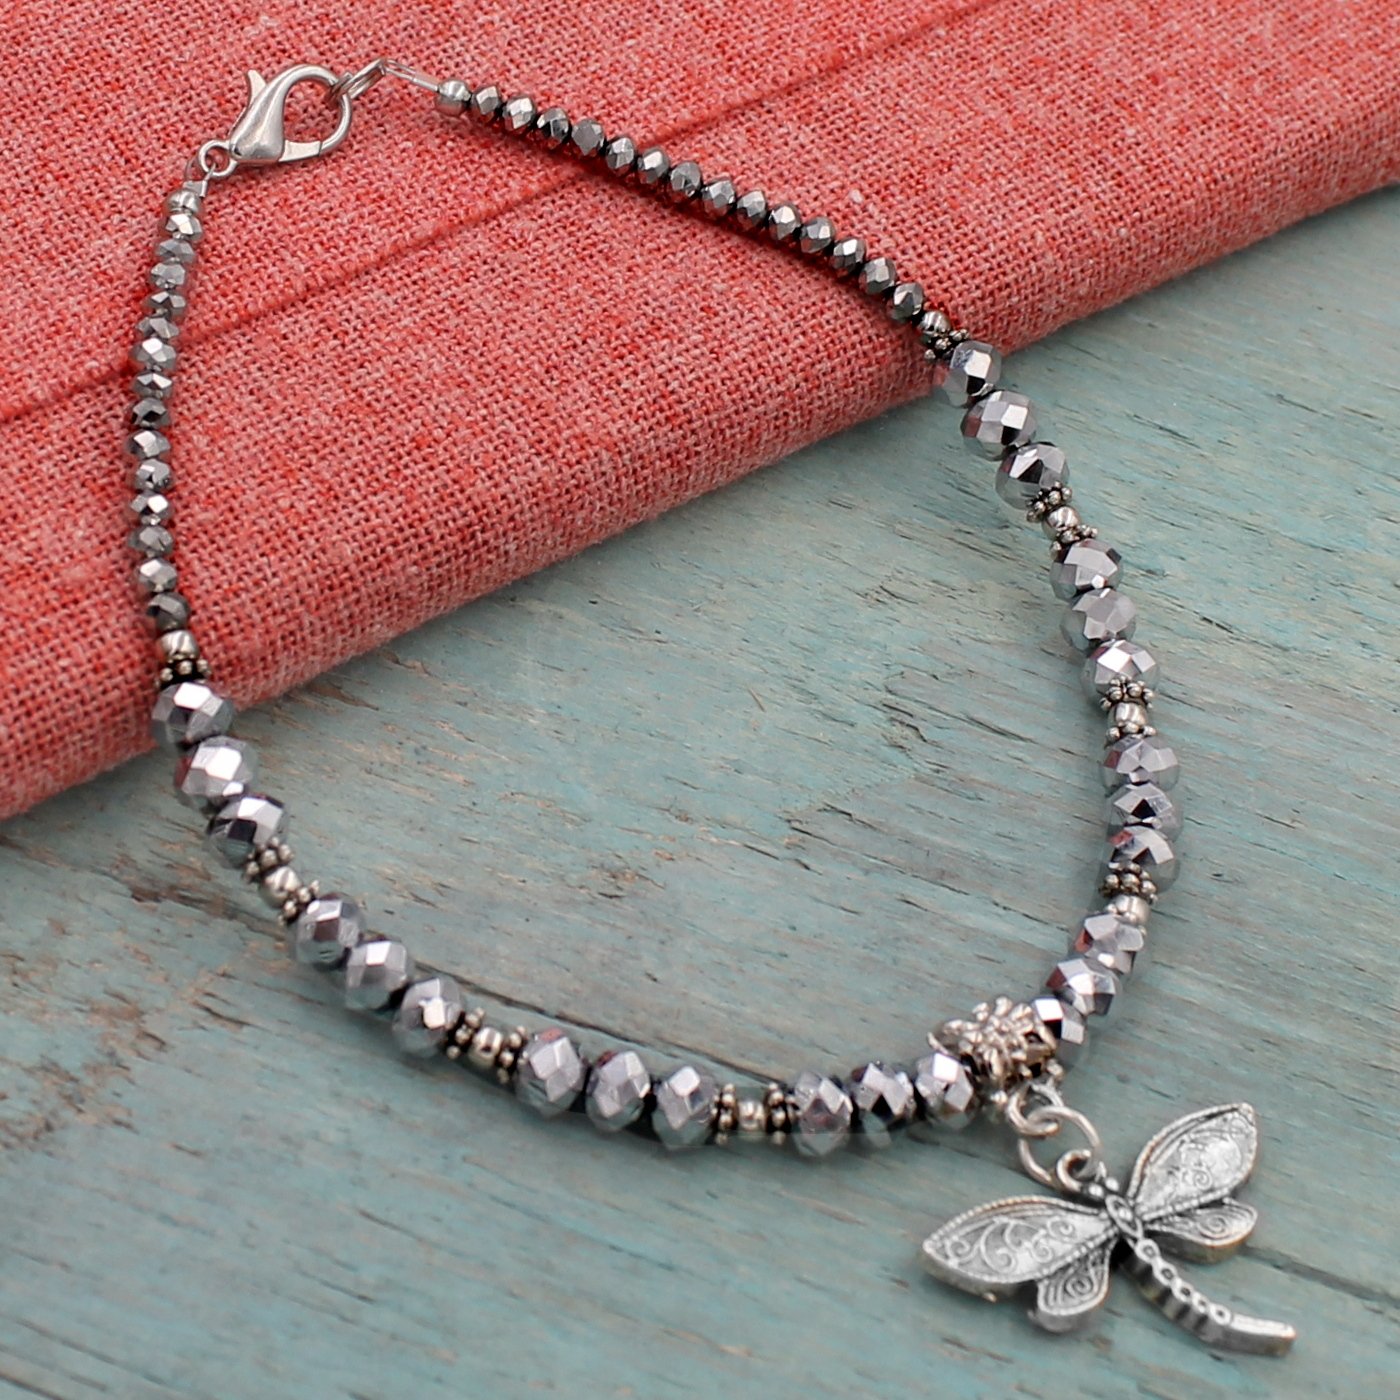 BESHEEK Dragonfly SILVER MIRROR Faceted Crystal Glass Artisan Beaded Anklet with Extension | Handmade Hypoallergenic Beach Gala Wedding Style Jewelry